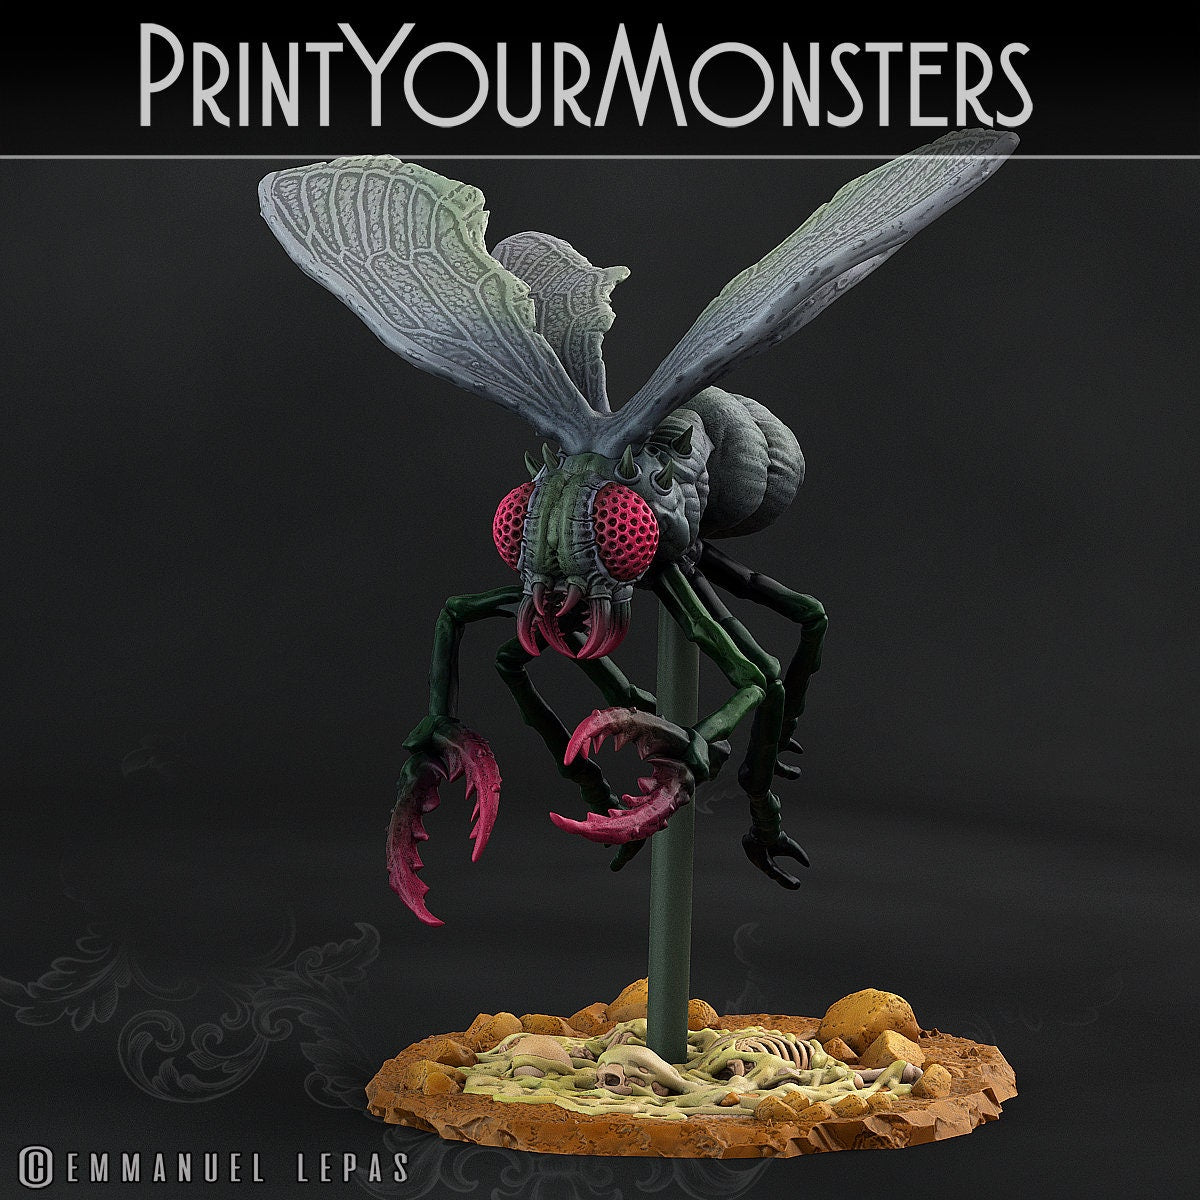 Giant Flys - Print Your Monsters 